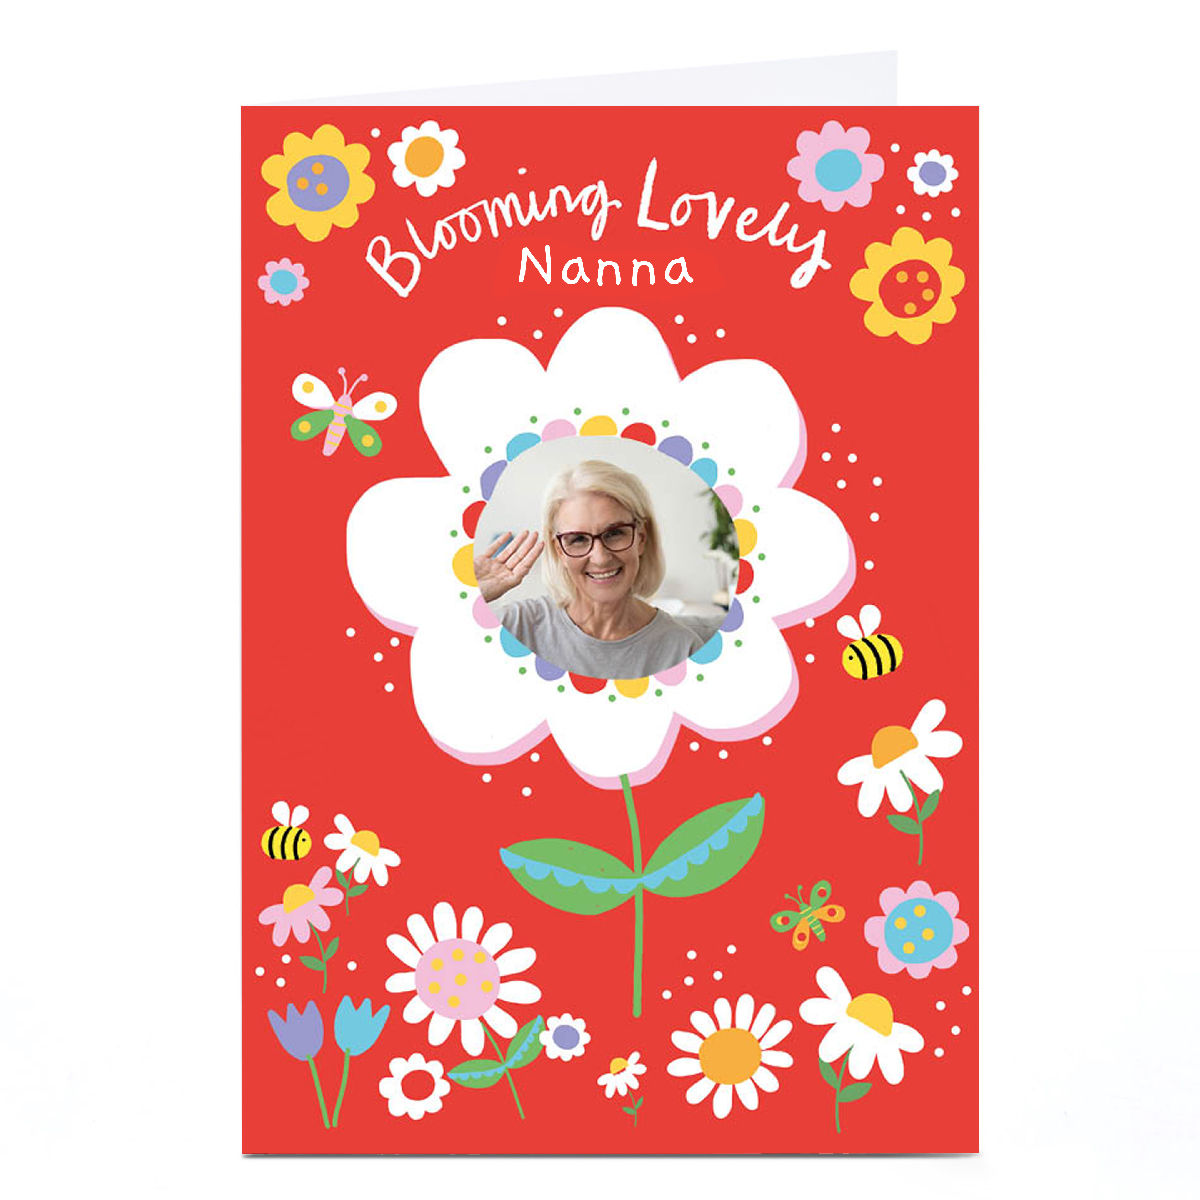 Personalised Lindsay Kirby Mother's Day Card - Blooming Lovely Nanna